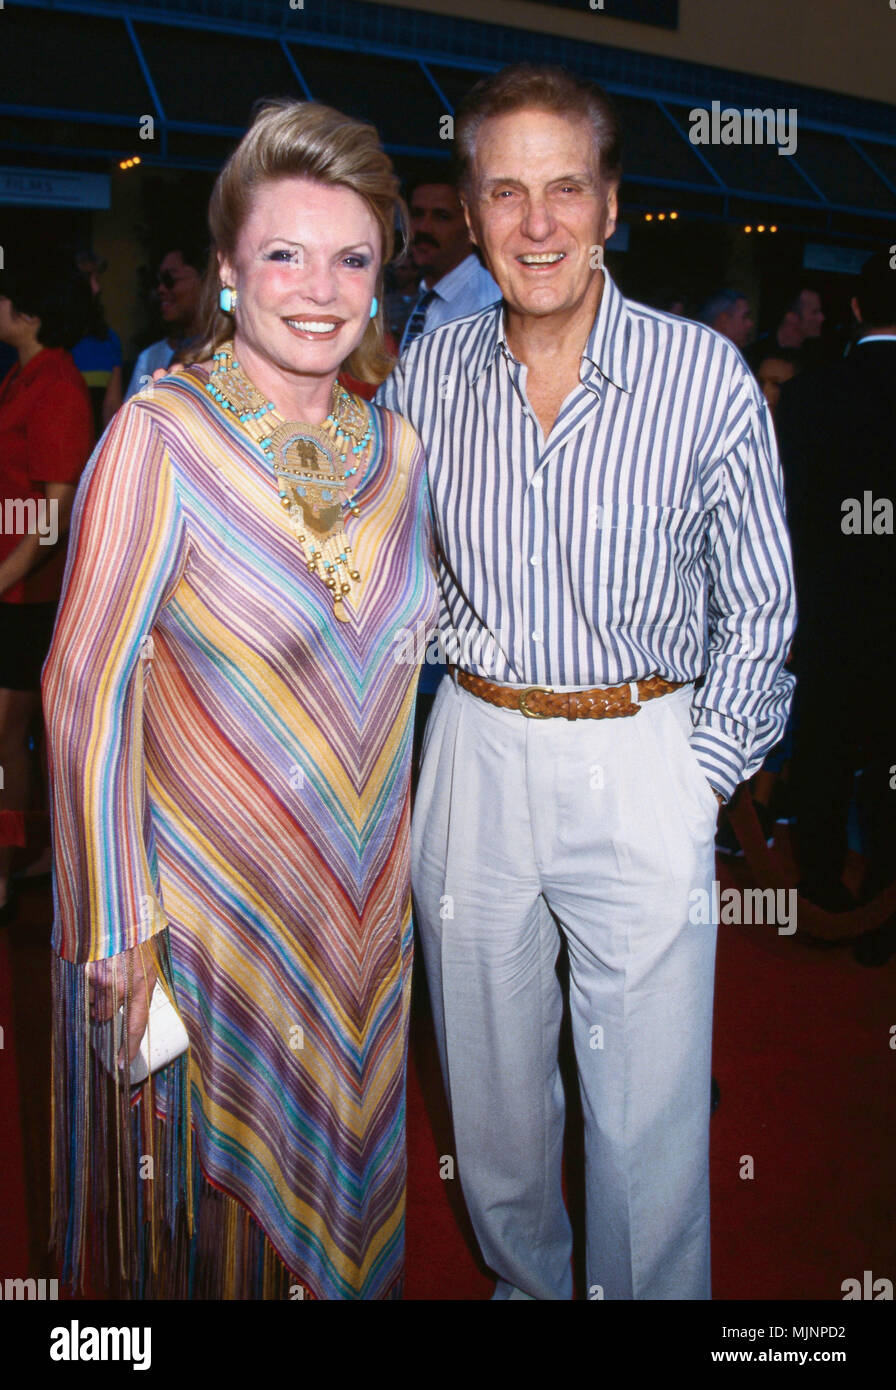 Robert Stack with his Wife --- ' Tsuni / Bourquard 'Robert Stack with his Wife Robert Stack with his Wife Robert Stack with his Wife Event in Hollywood Life - California,  Red Carpet Event, Vertical, USA, Film Industry, Celebrities,  Photography, Bestof, Arts Culture and Entertainment, Topix  Celebrities fashion /  from the Red Carpet-1994-2000, one person, Vertical, Best of, Hollywood Life, Event in Hollywood Life - California,  Red Carpet and backstage, USA, Film Industry, Celebrities,  Photography, Bestof, Arts Culture and Entertainment,  Topix Family Related inquiry tsuni@Gamma-USA.com Stock Photo